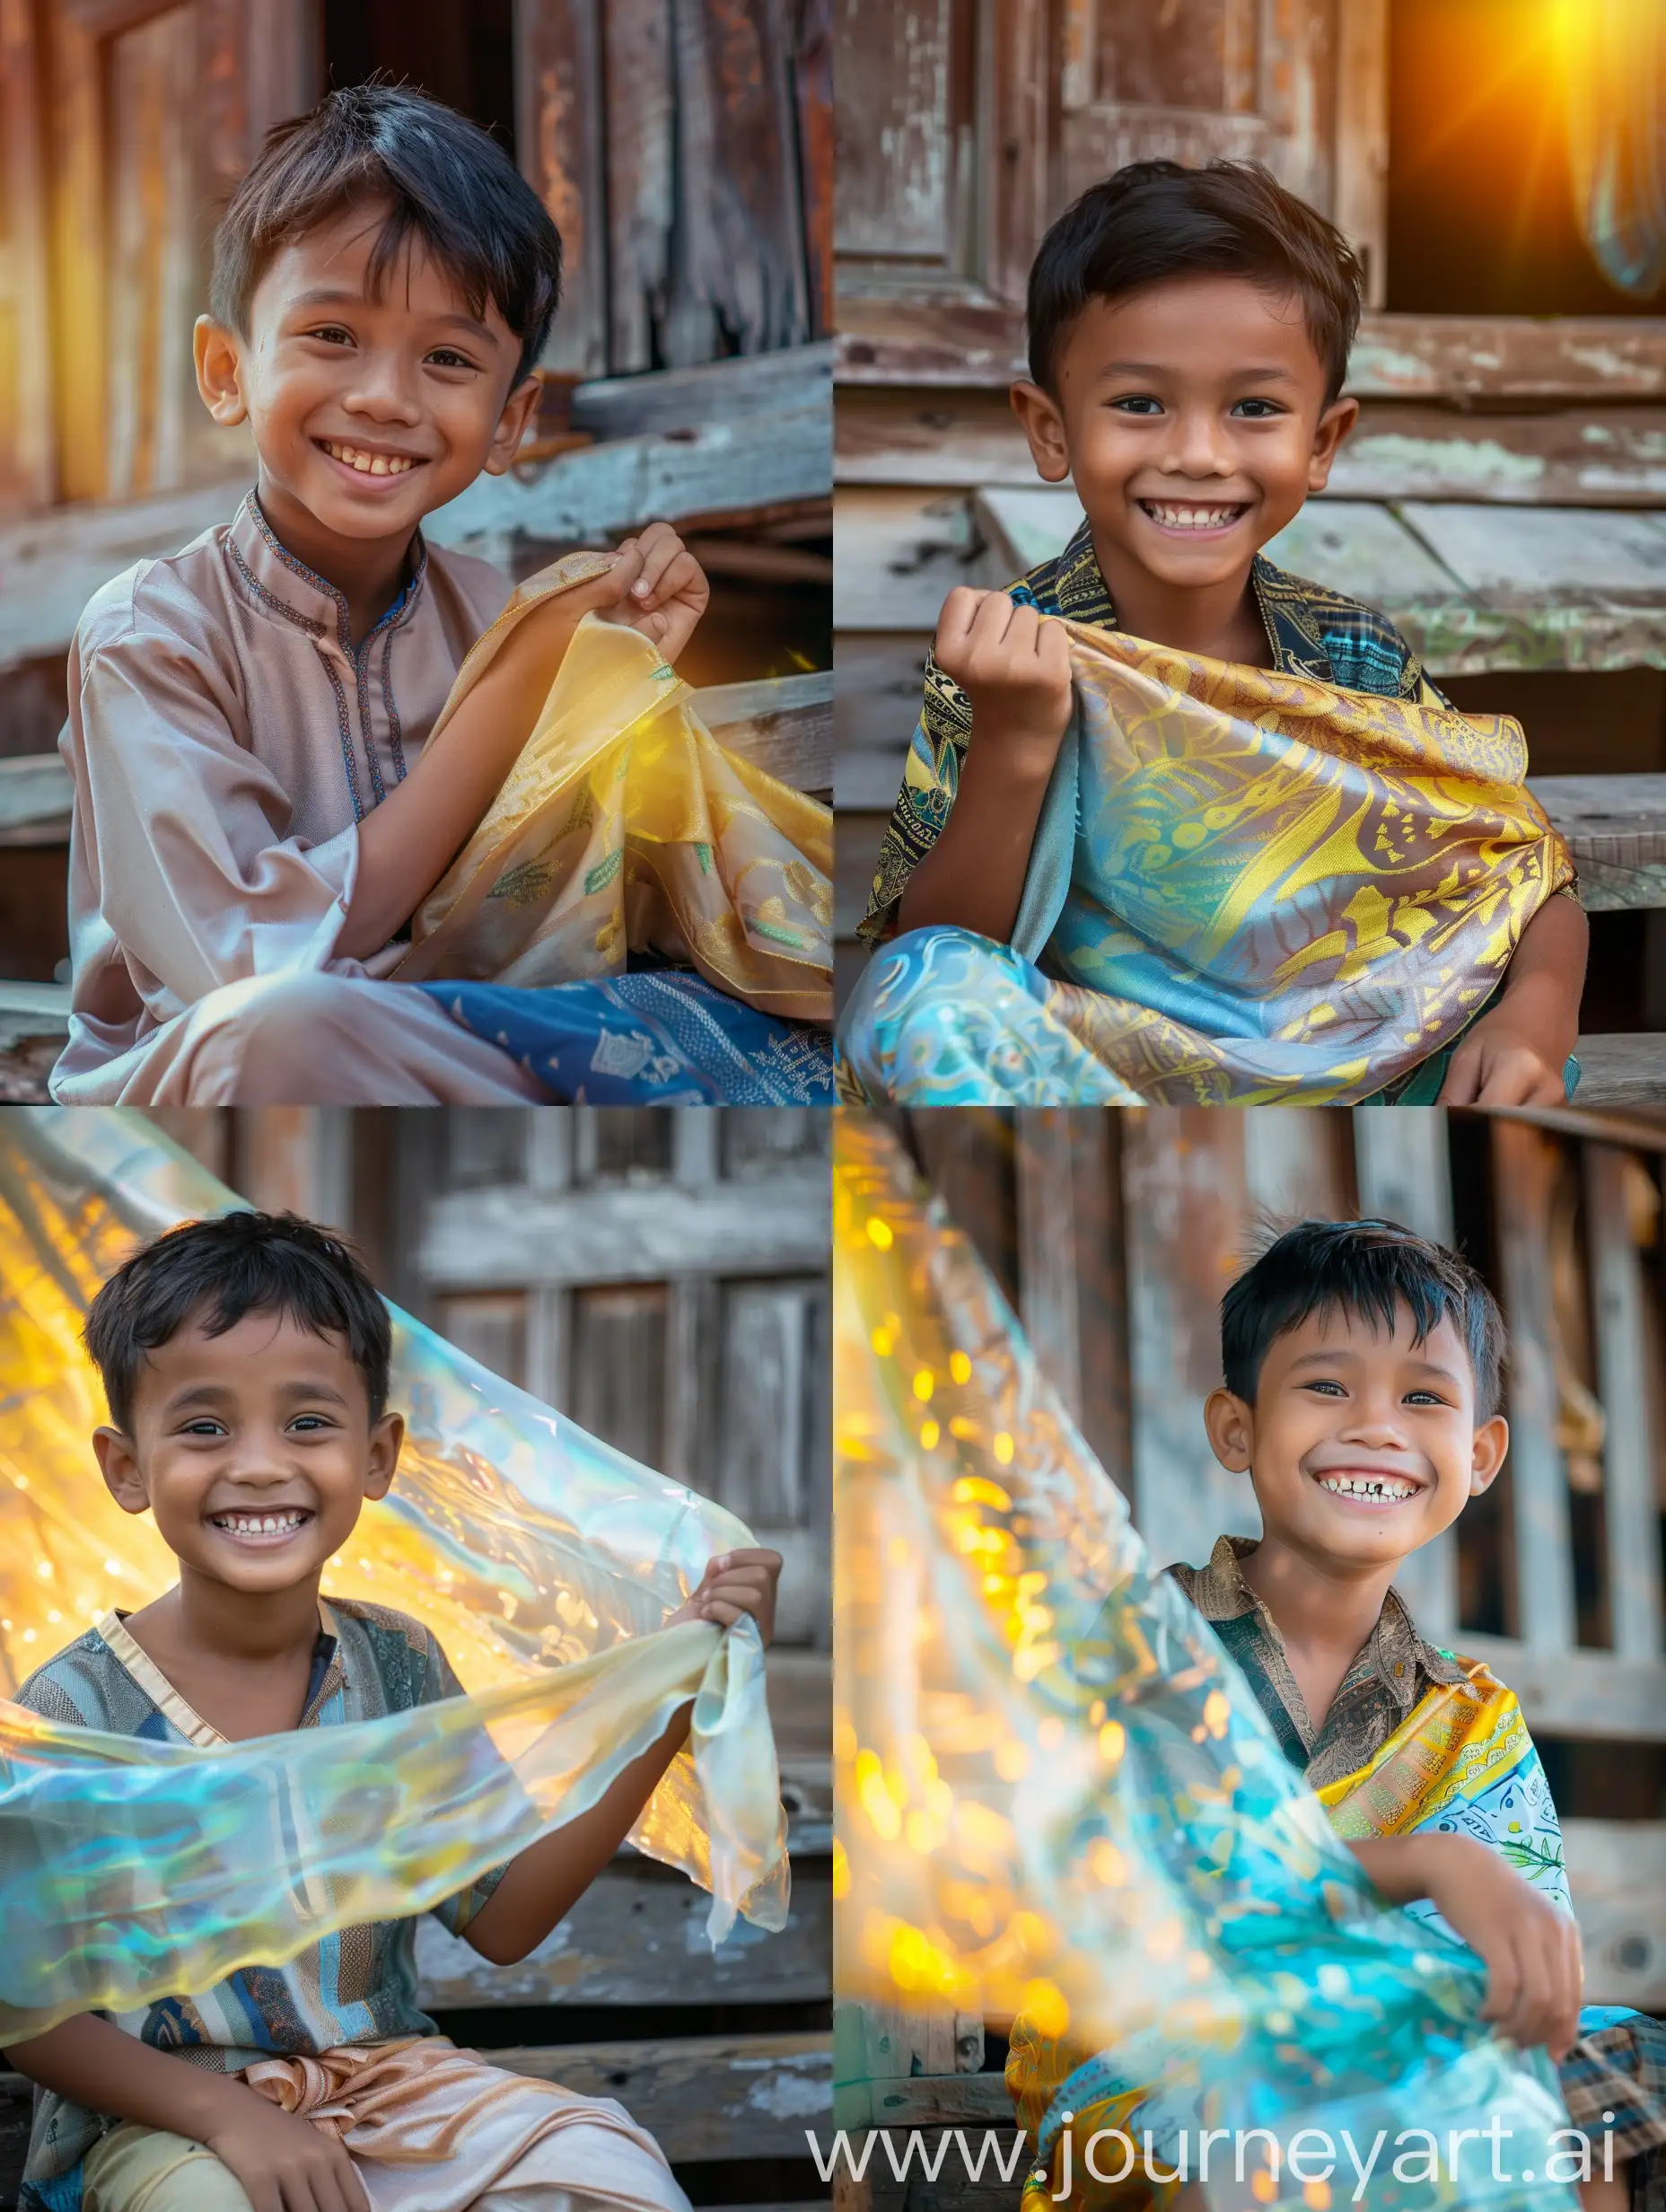 close up. Malay boy sitting on the steps of a wooden house smiling. wearing Malay clothes and sarong cloth. his left hand held the sarong he was wearing while lifting it slightly up. classic malay house background. there is refraction of yellow and blue light